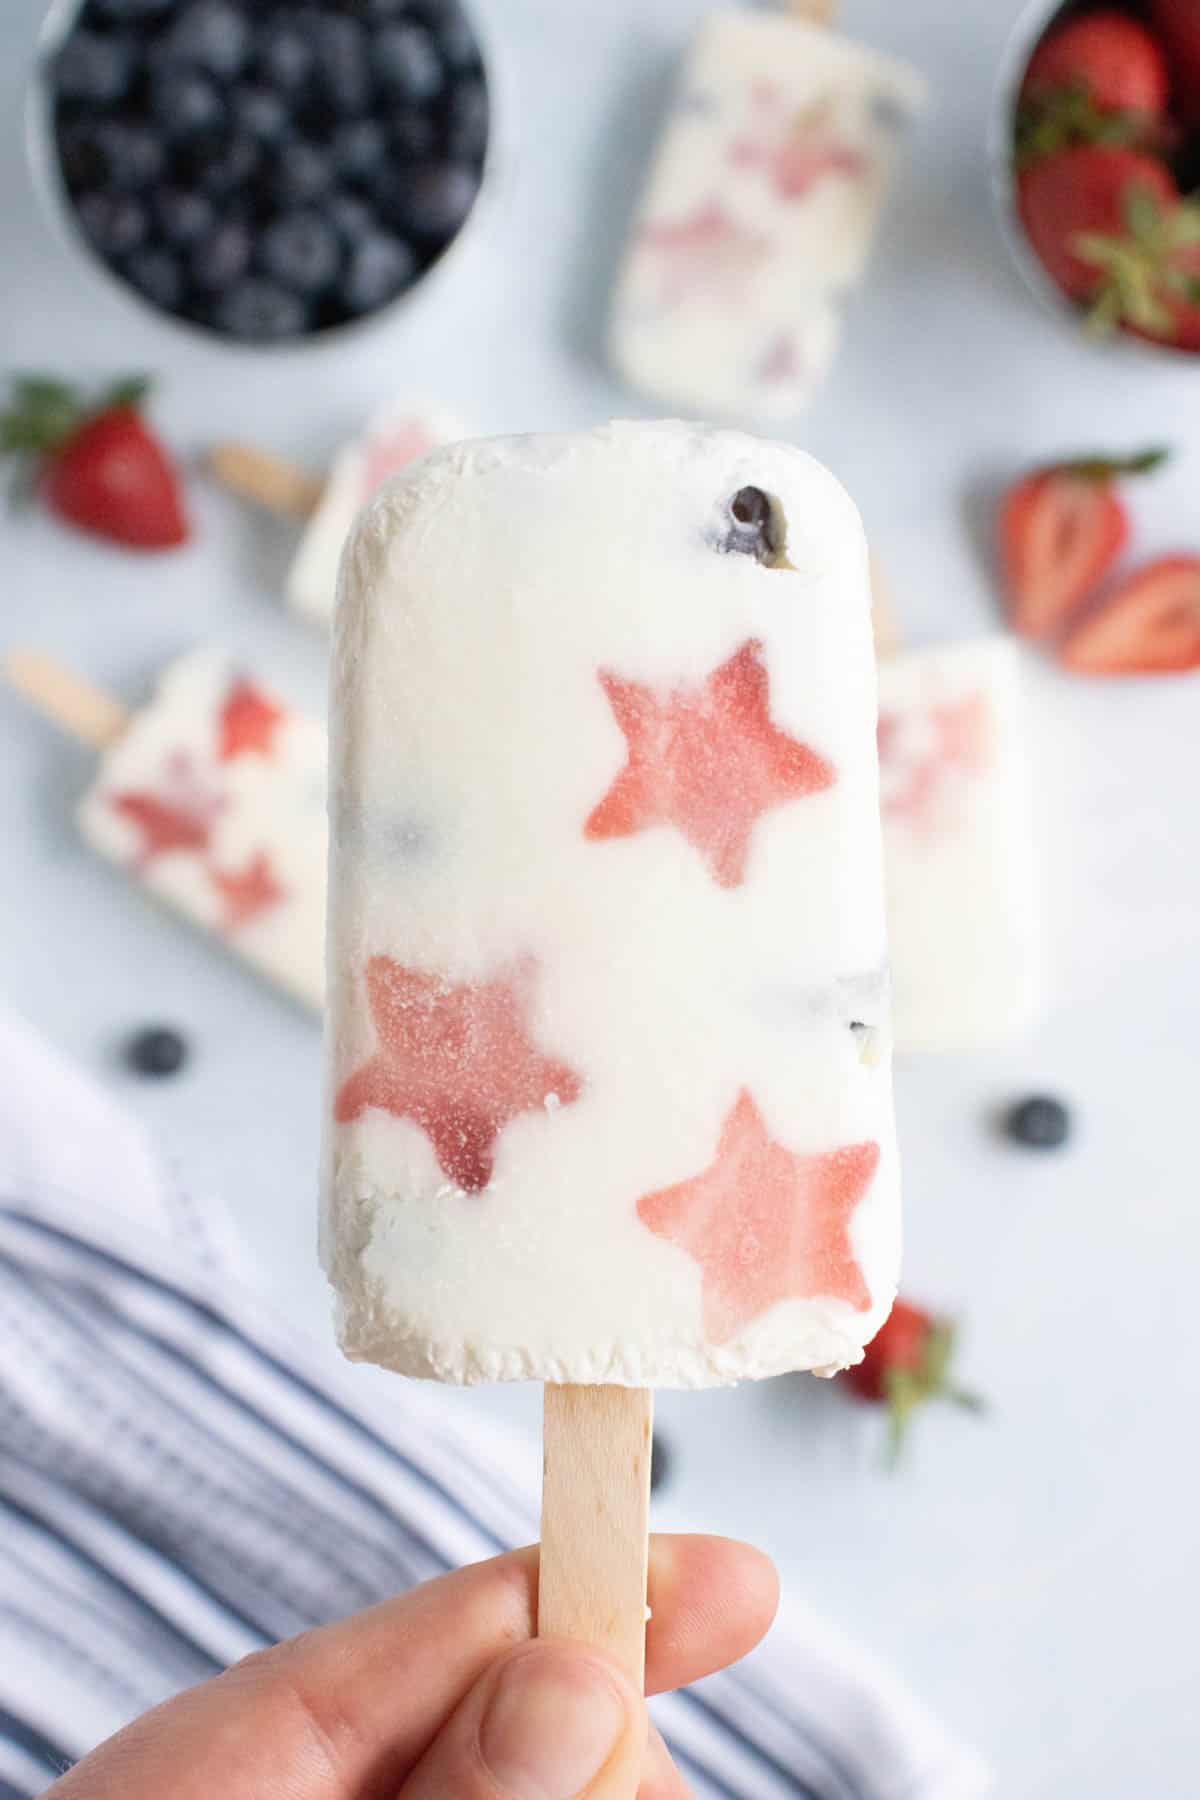 A hand holding a patriotic popsicle made with fruit and yogurt.